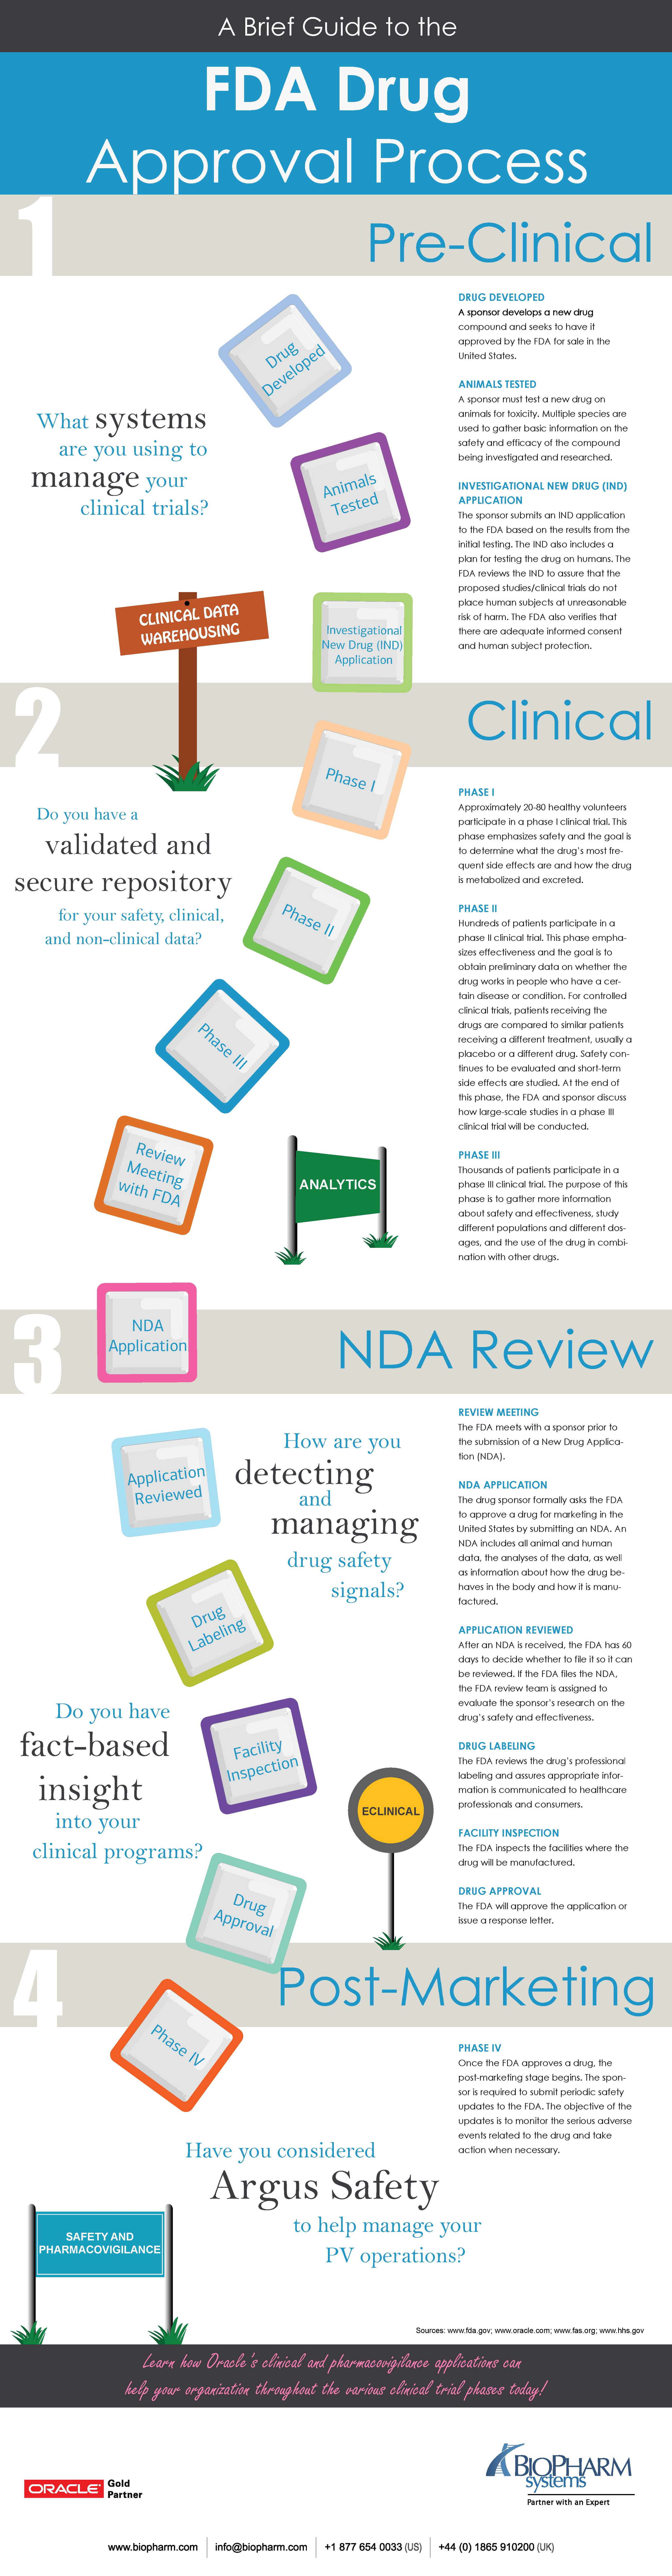 A Brief Guide to the FDA Drug Approval Process Visual.ly